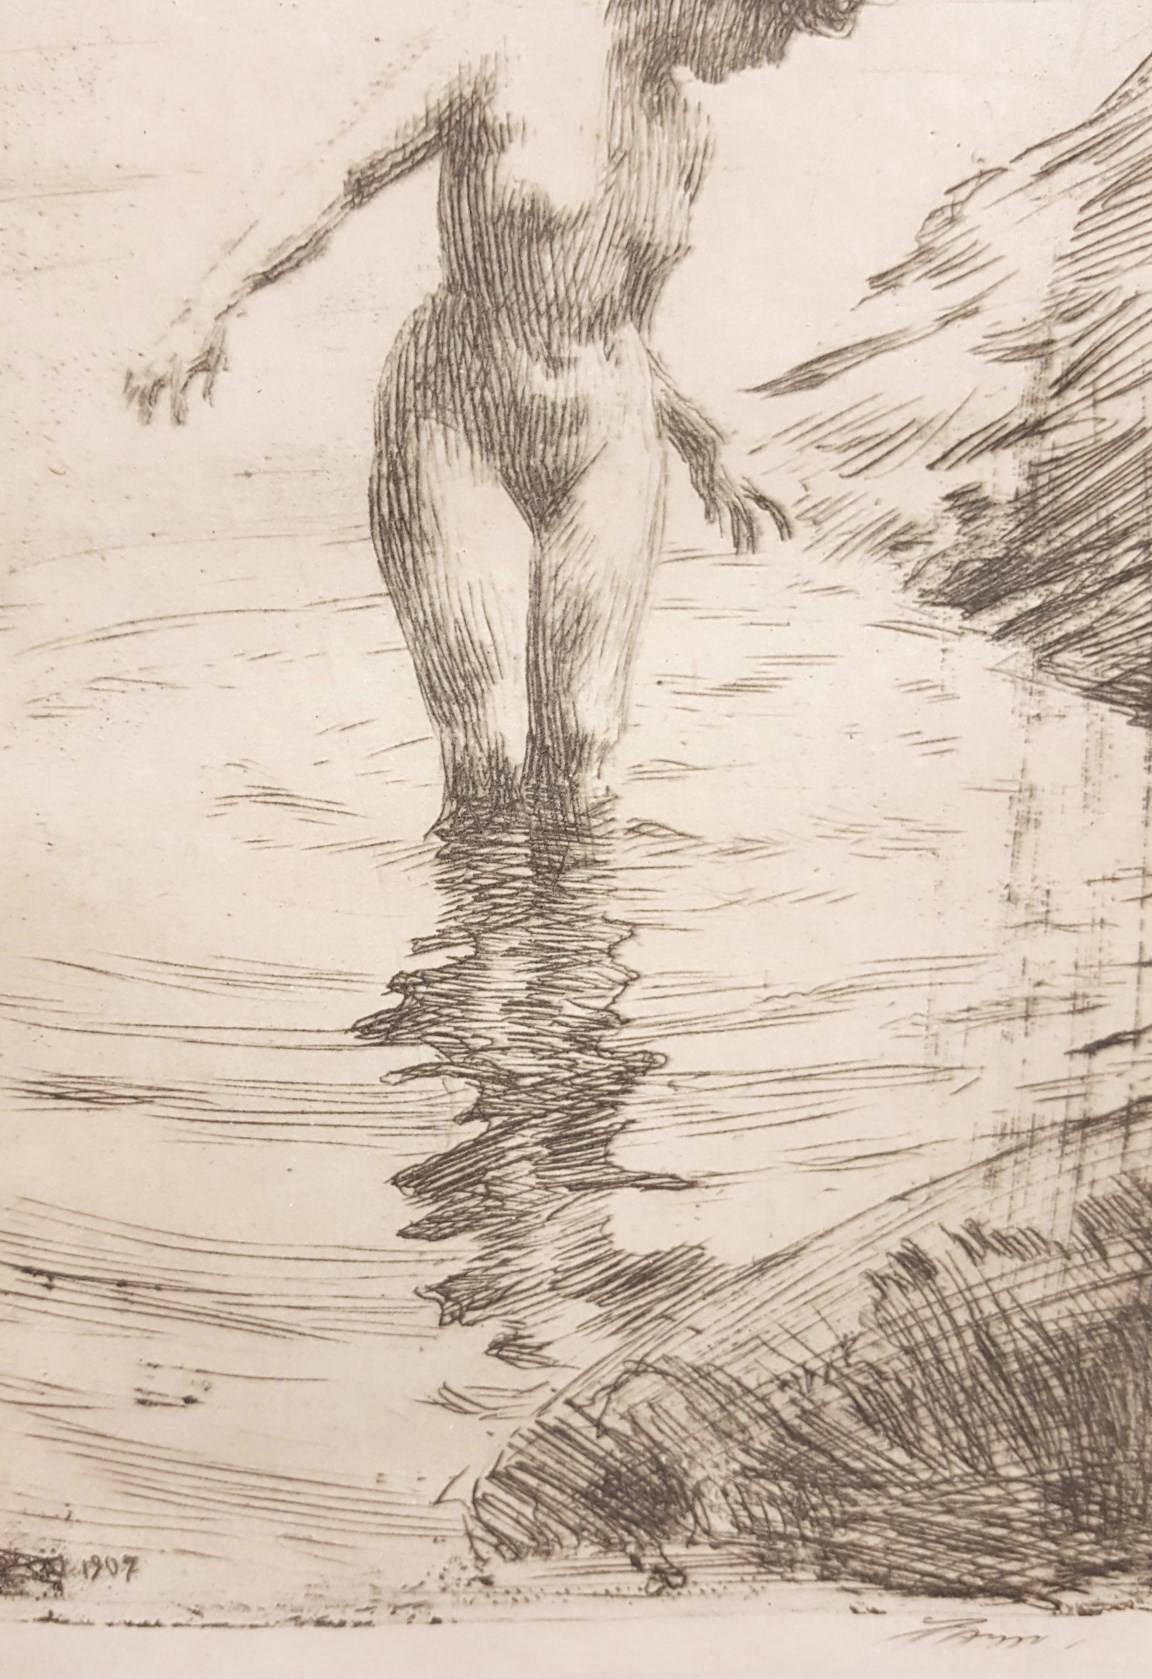 An original etching on ivory laid paper by Swedish artist Anders Zorn (1860-1920) titled "Cercles D'eau II", executed by Zorn in his studio in 1907. From the unsigned edition. Signed in the plate lower right. Dated in the plate lower left.